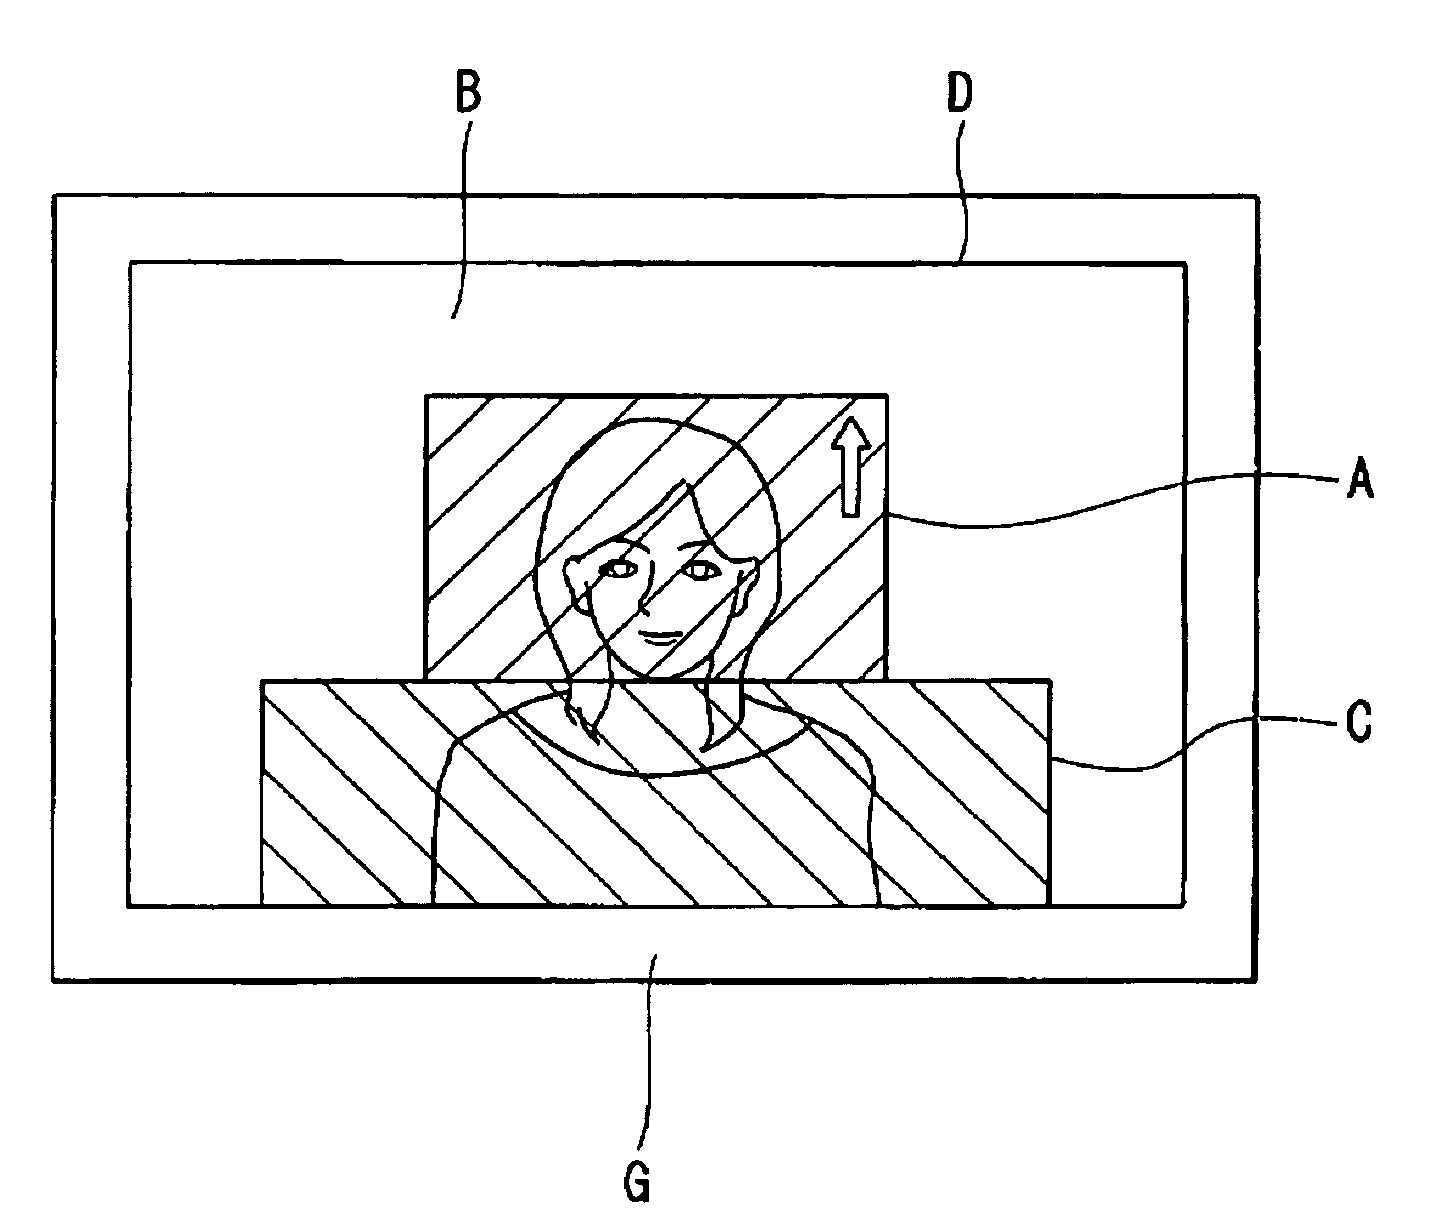 Digital camera with face detection function for facilitating exposure compensation